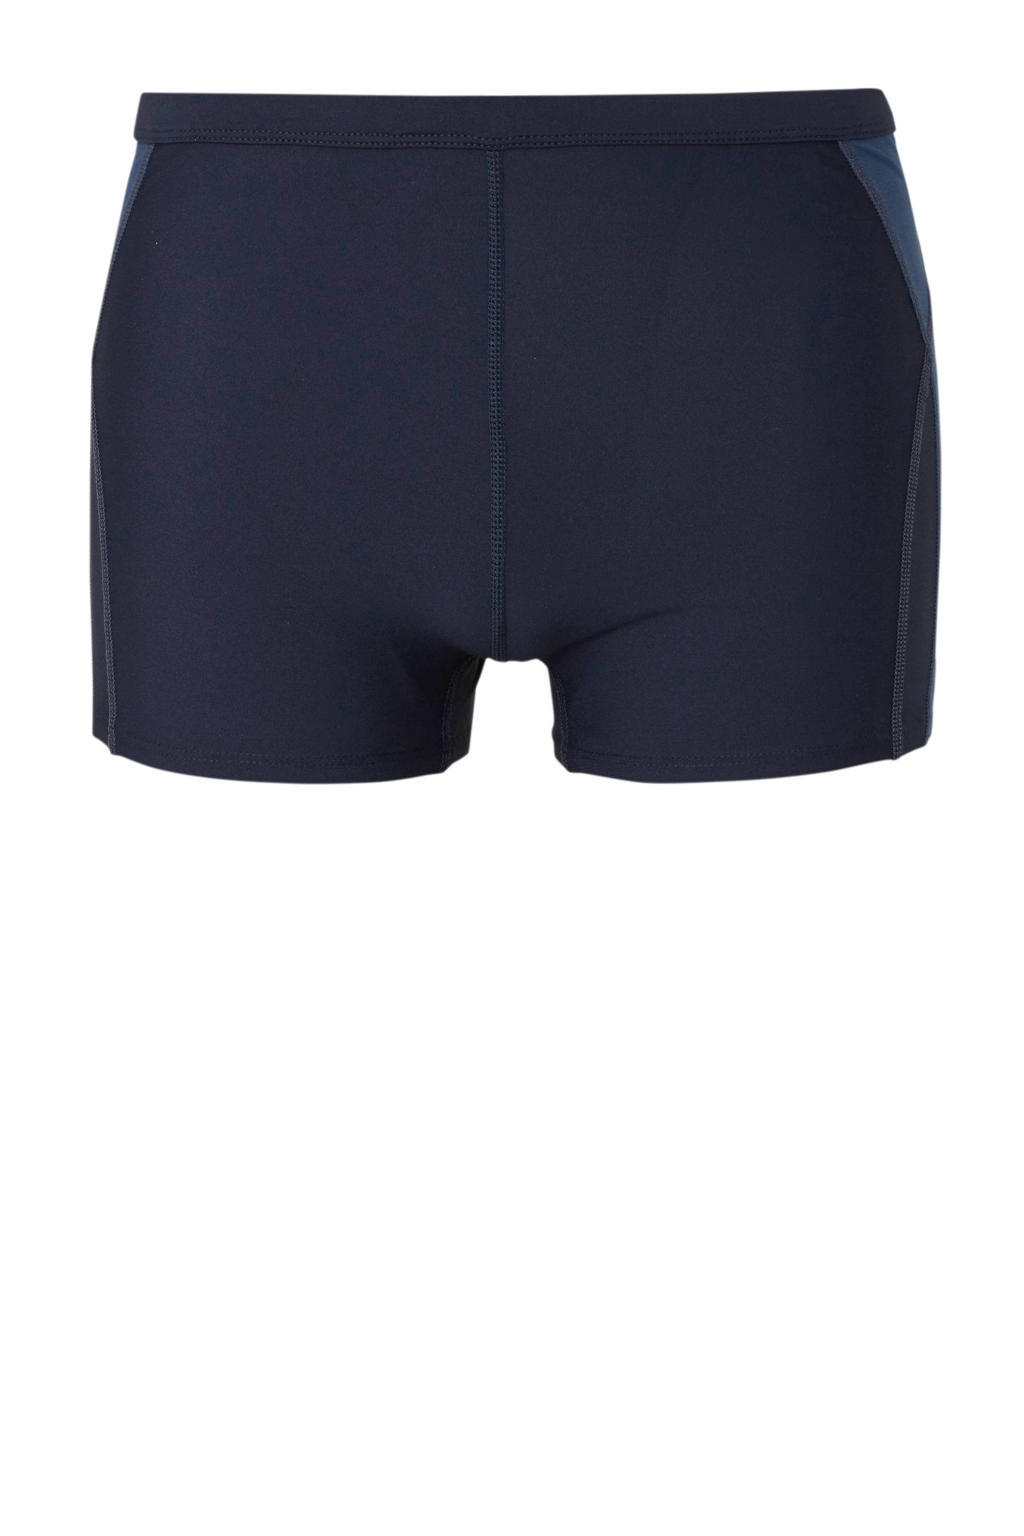 Nike zwemboxer Poly Solid Square Leg donkerblauw